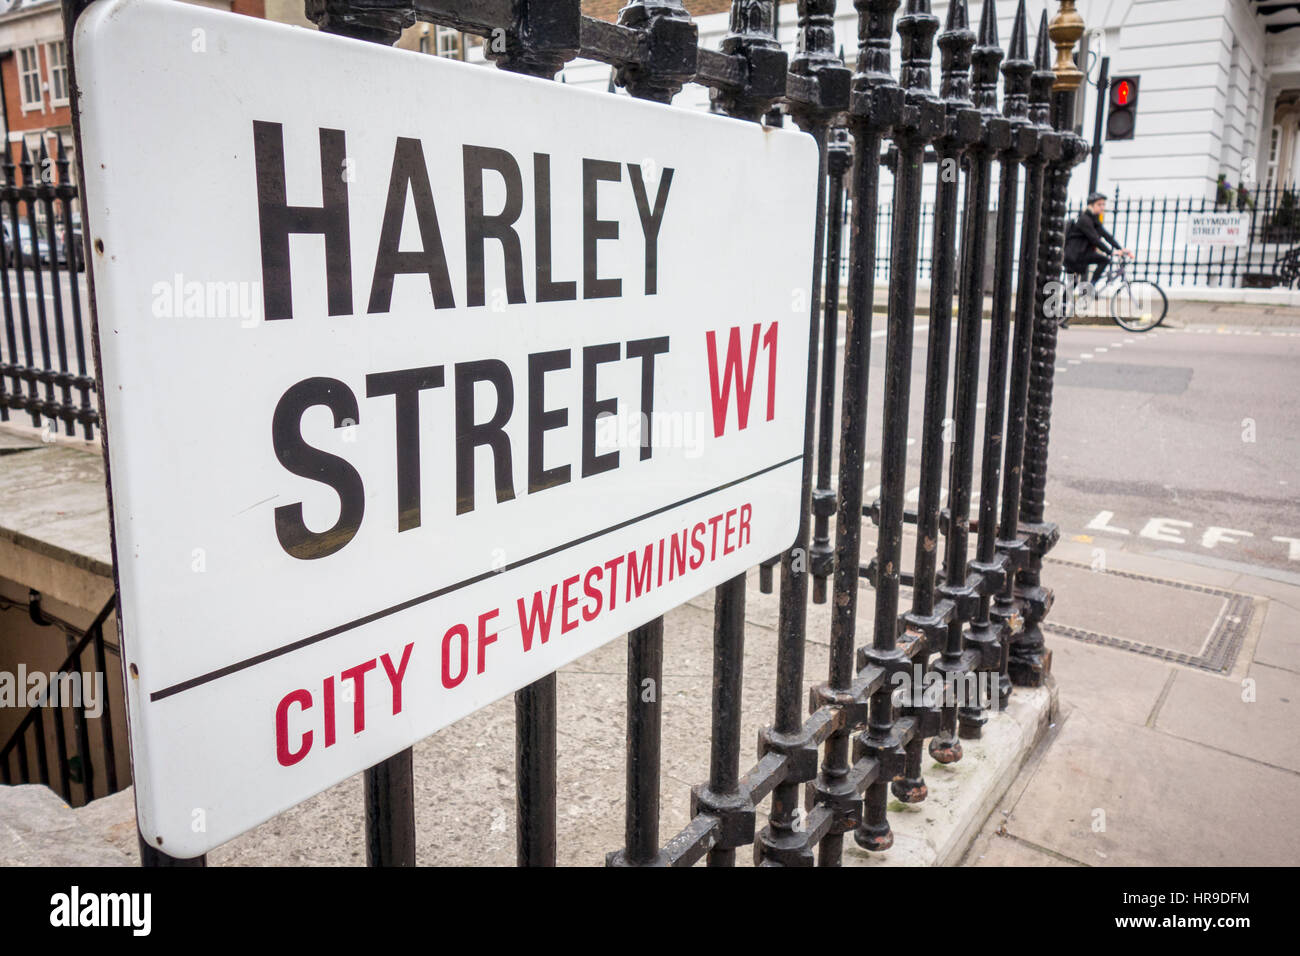 Harley Streey road sign, City of Westminster, London, UK Stock Photo